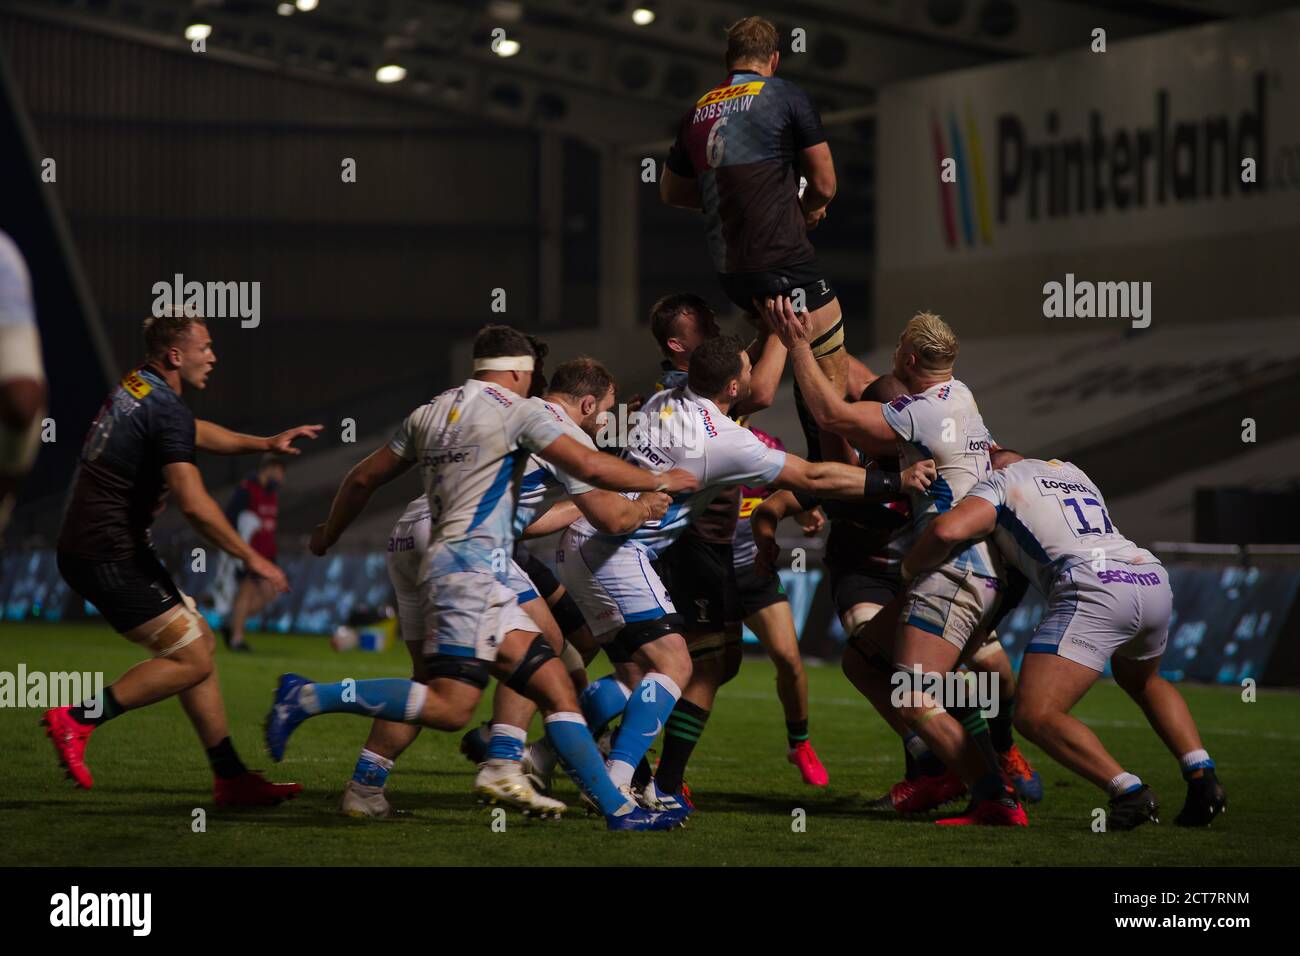 Manchester, England, 21 September 2020. Chris Robshaw winning a line out for Harlequins against Sale Sharks in the Premiership Rugby Cup Final at the A J Bell Stadium. Credit: Colin Edwards/Alamy Live News. Stock Photo